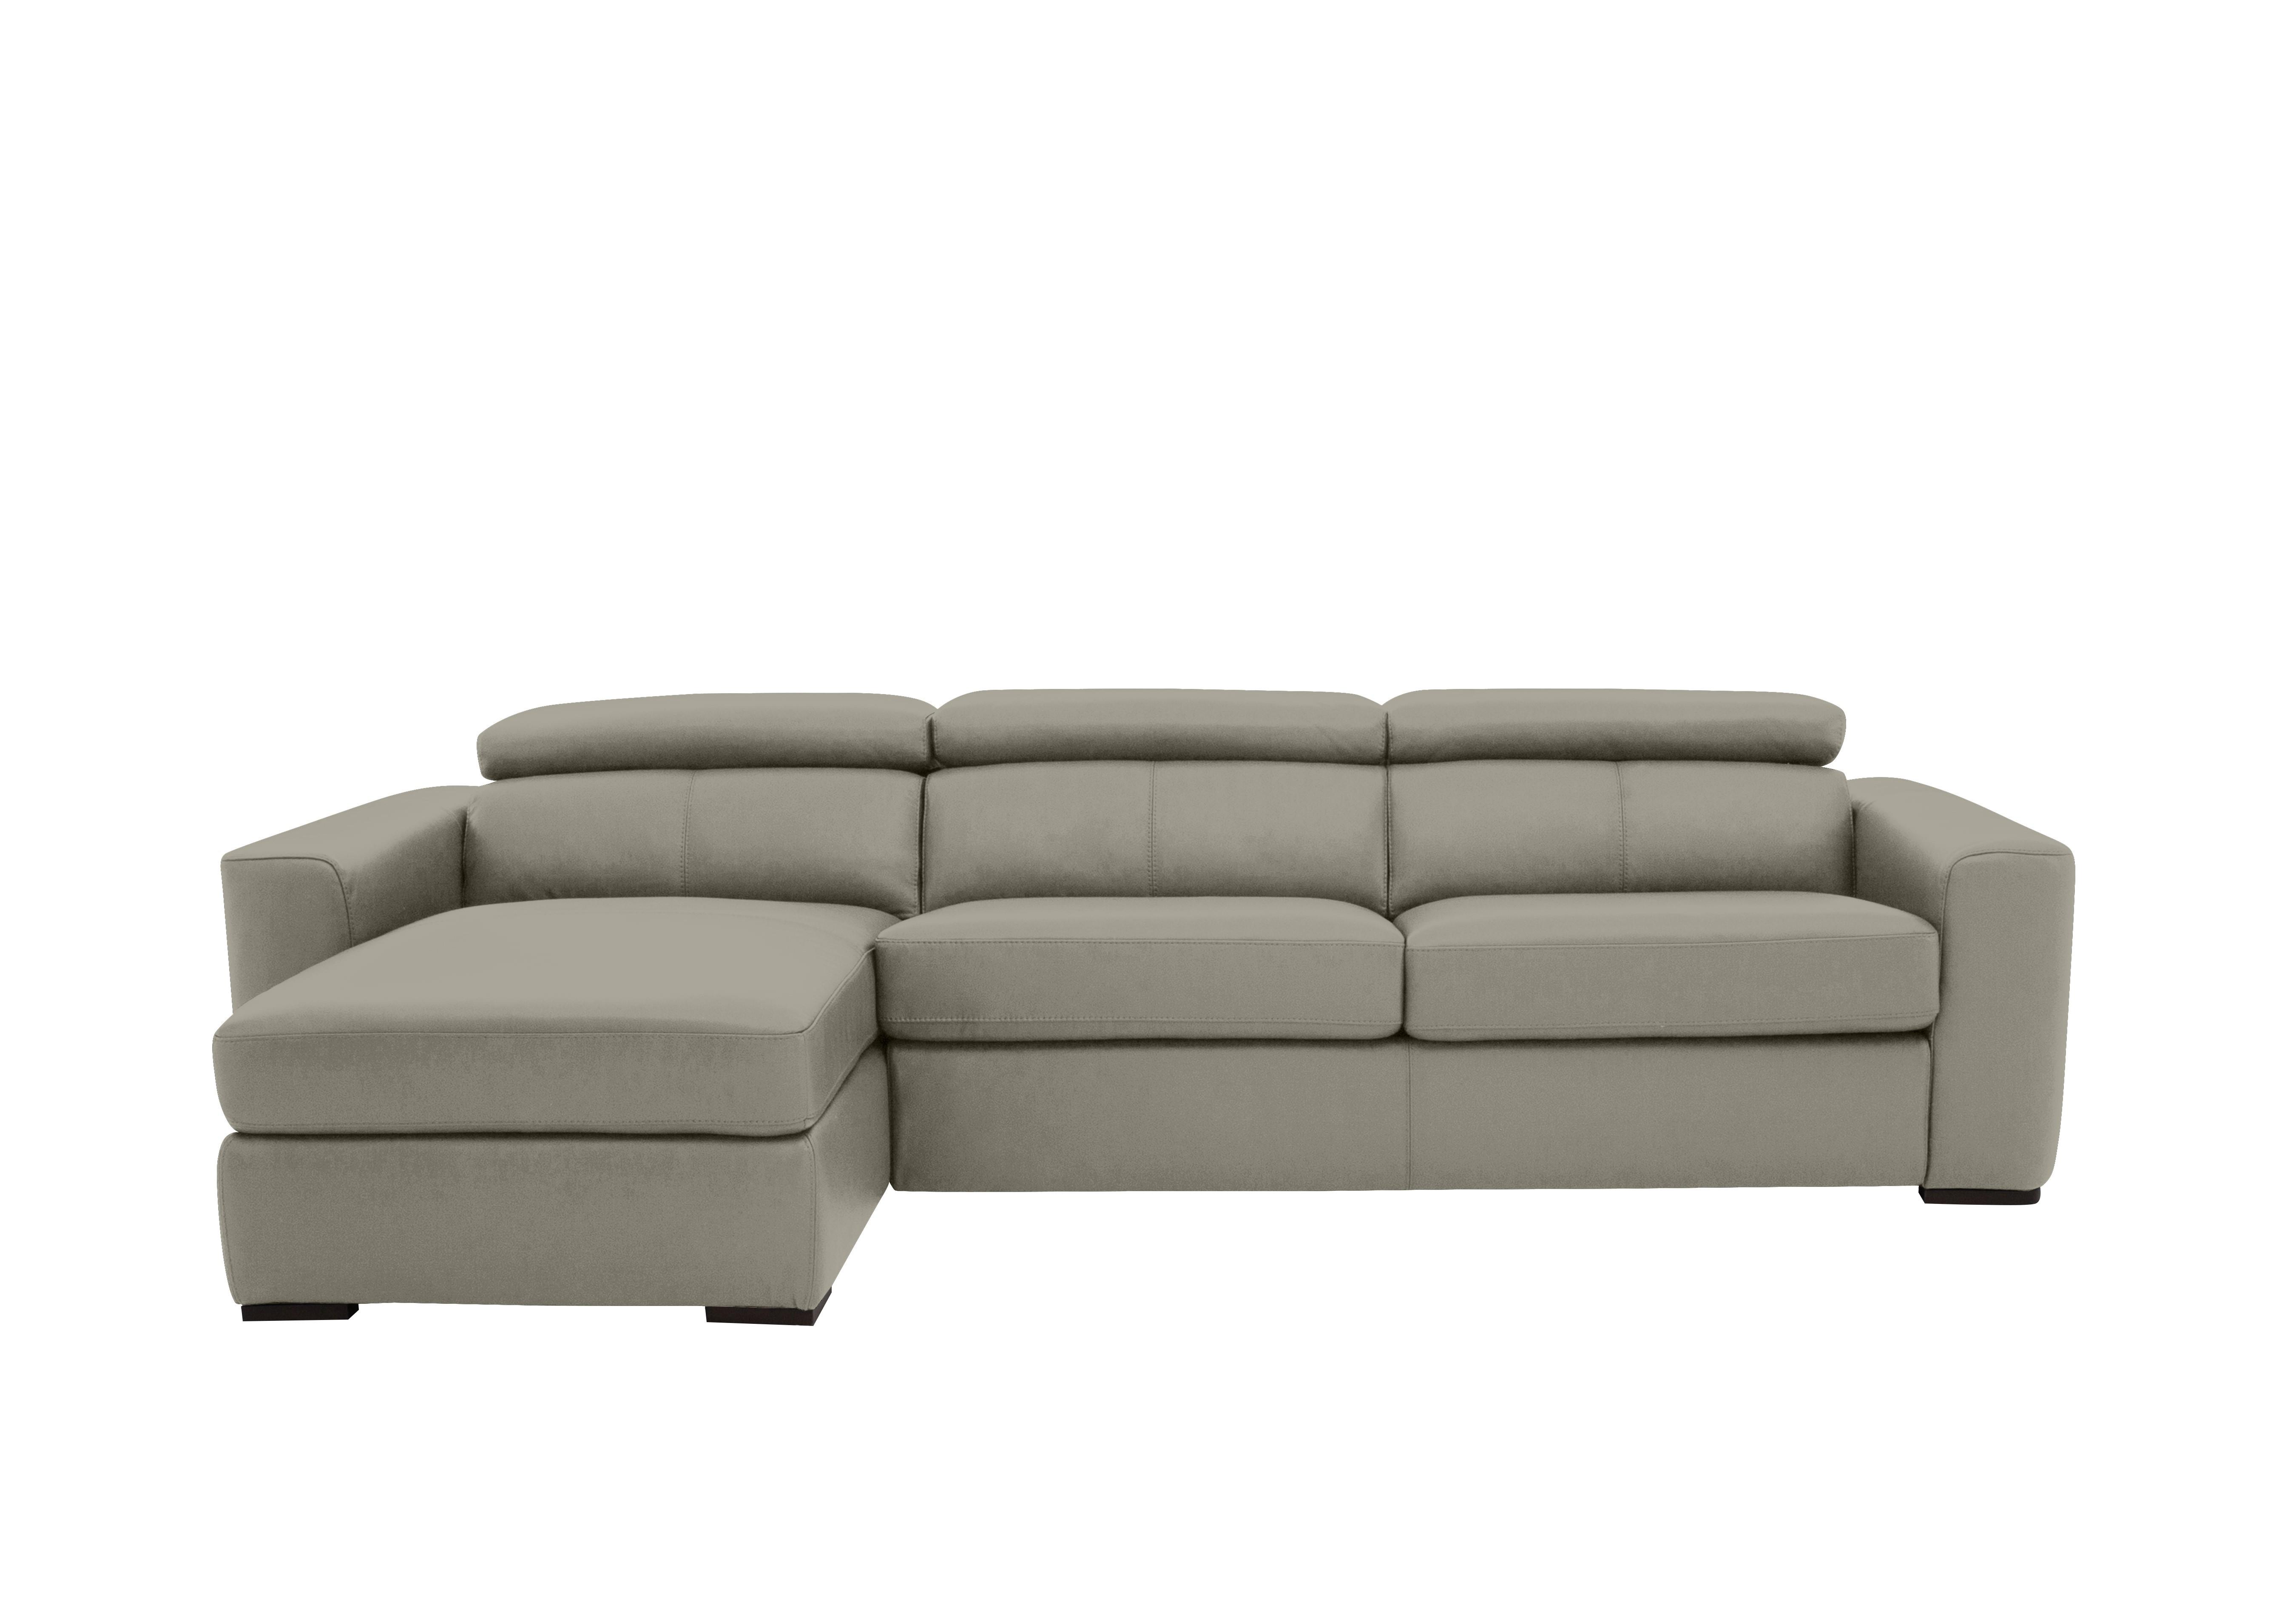 Infinity Leather Corner Chaise Sofabed with Storage in Bv-946b Silver Grey on Furniture Village